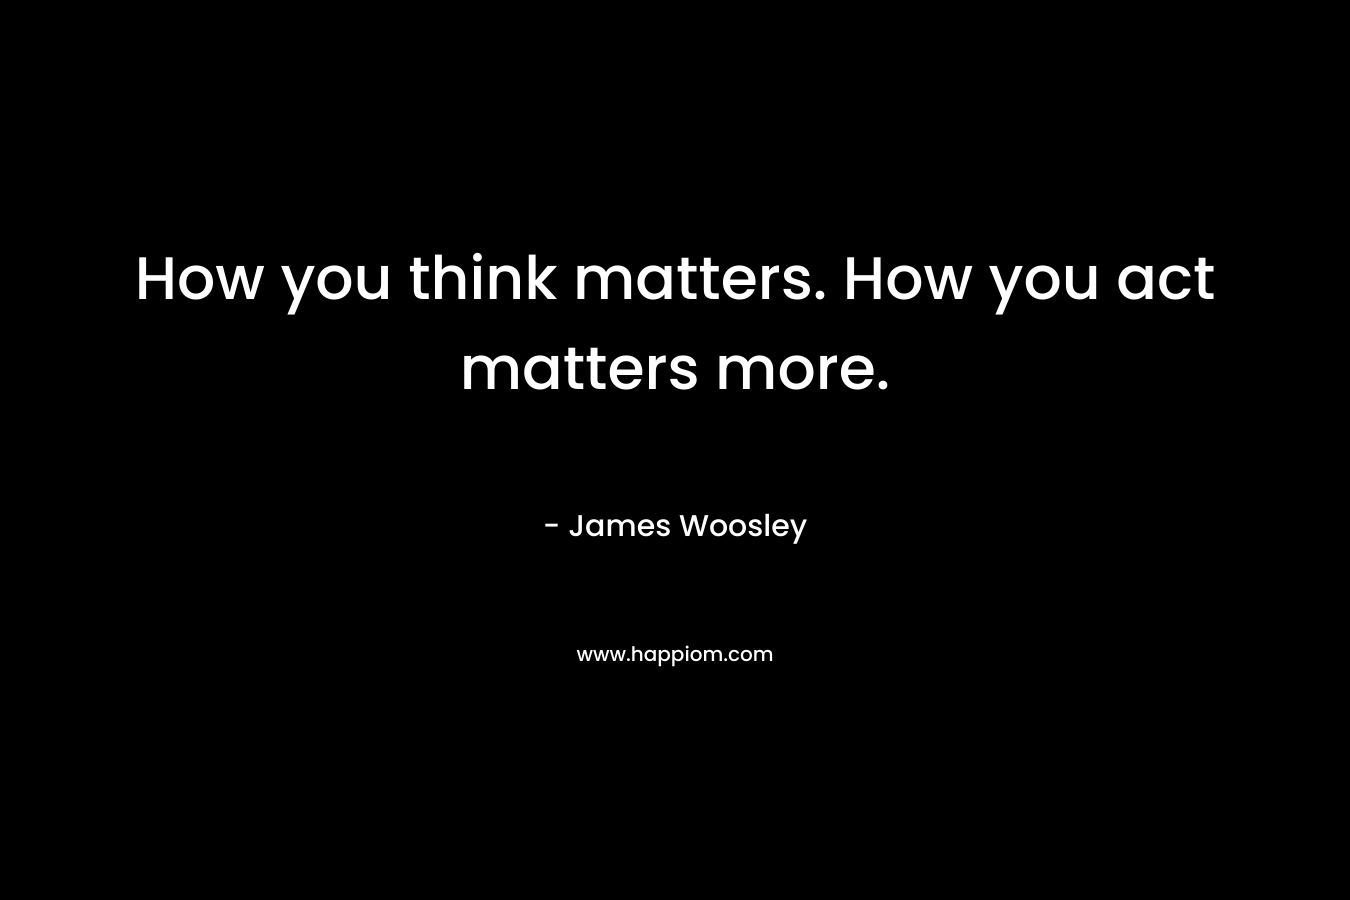 How you think matters. How you act matters more.